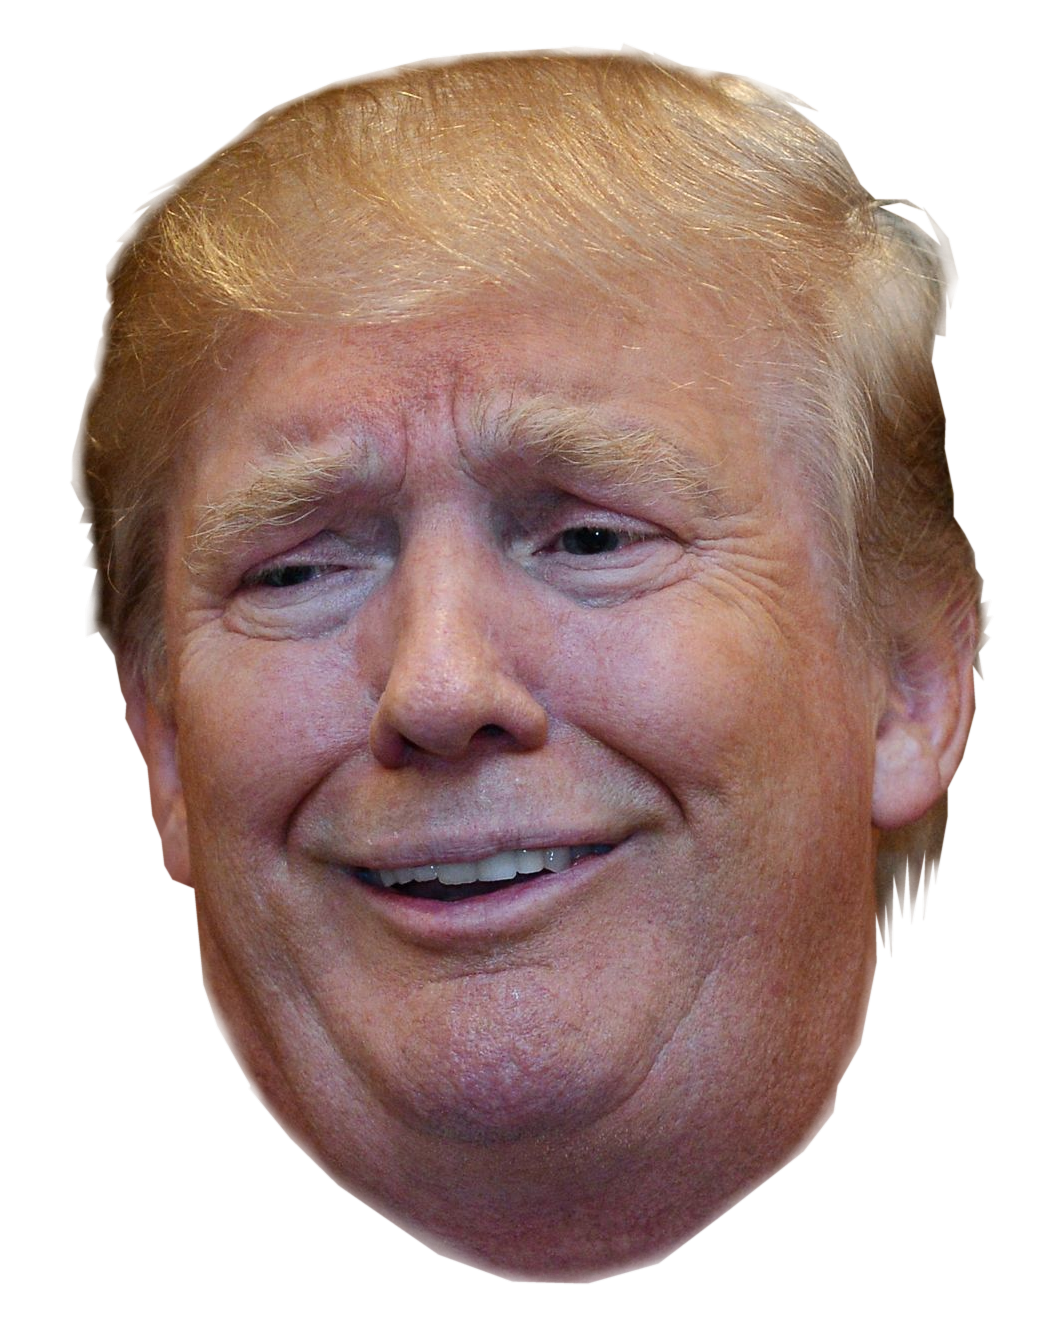 Download Funny Head Trump Youtube Up Face Donald HQ PNG Image | FreePNGImg